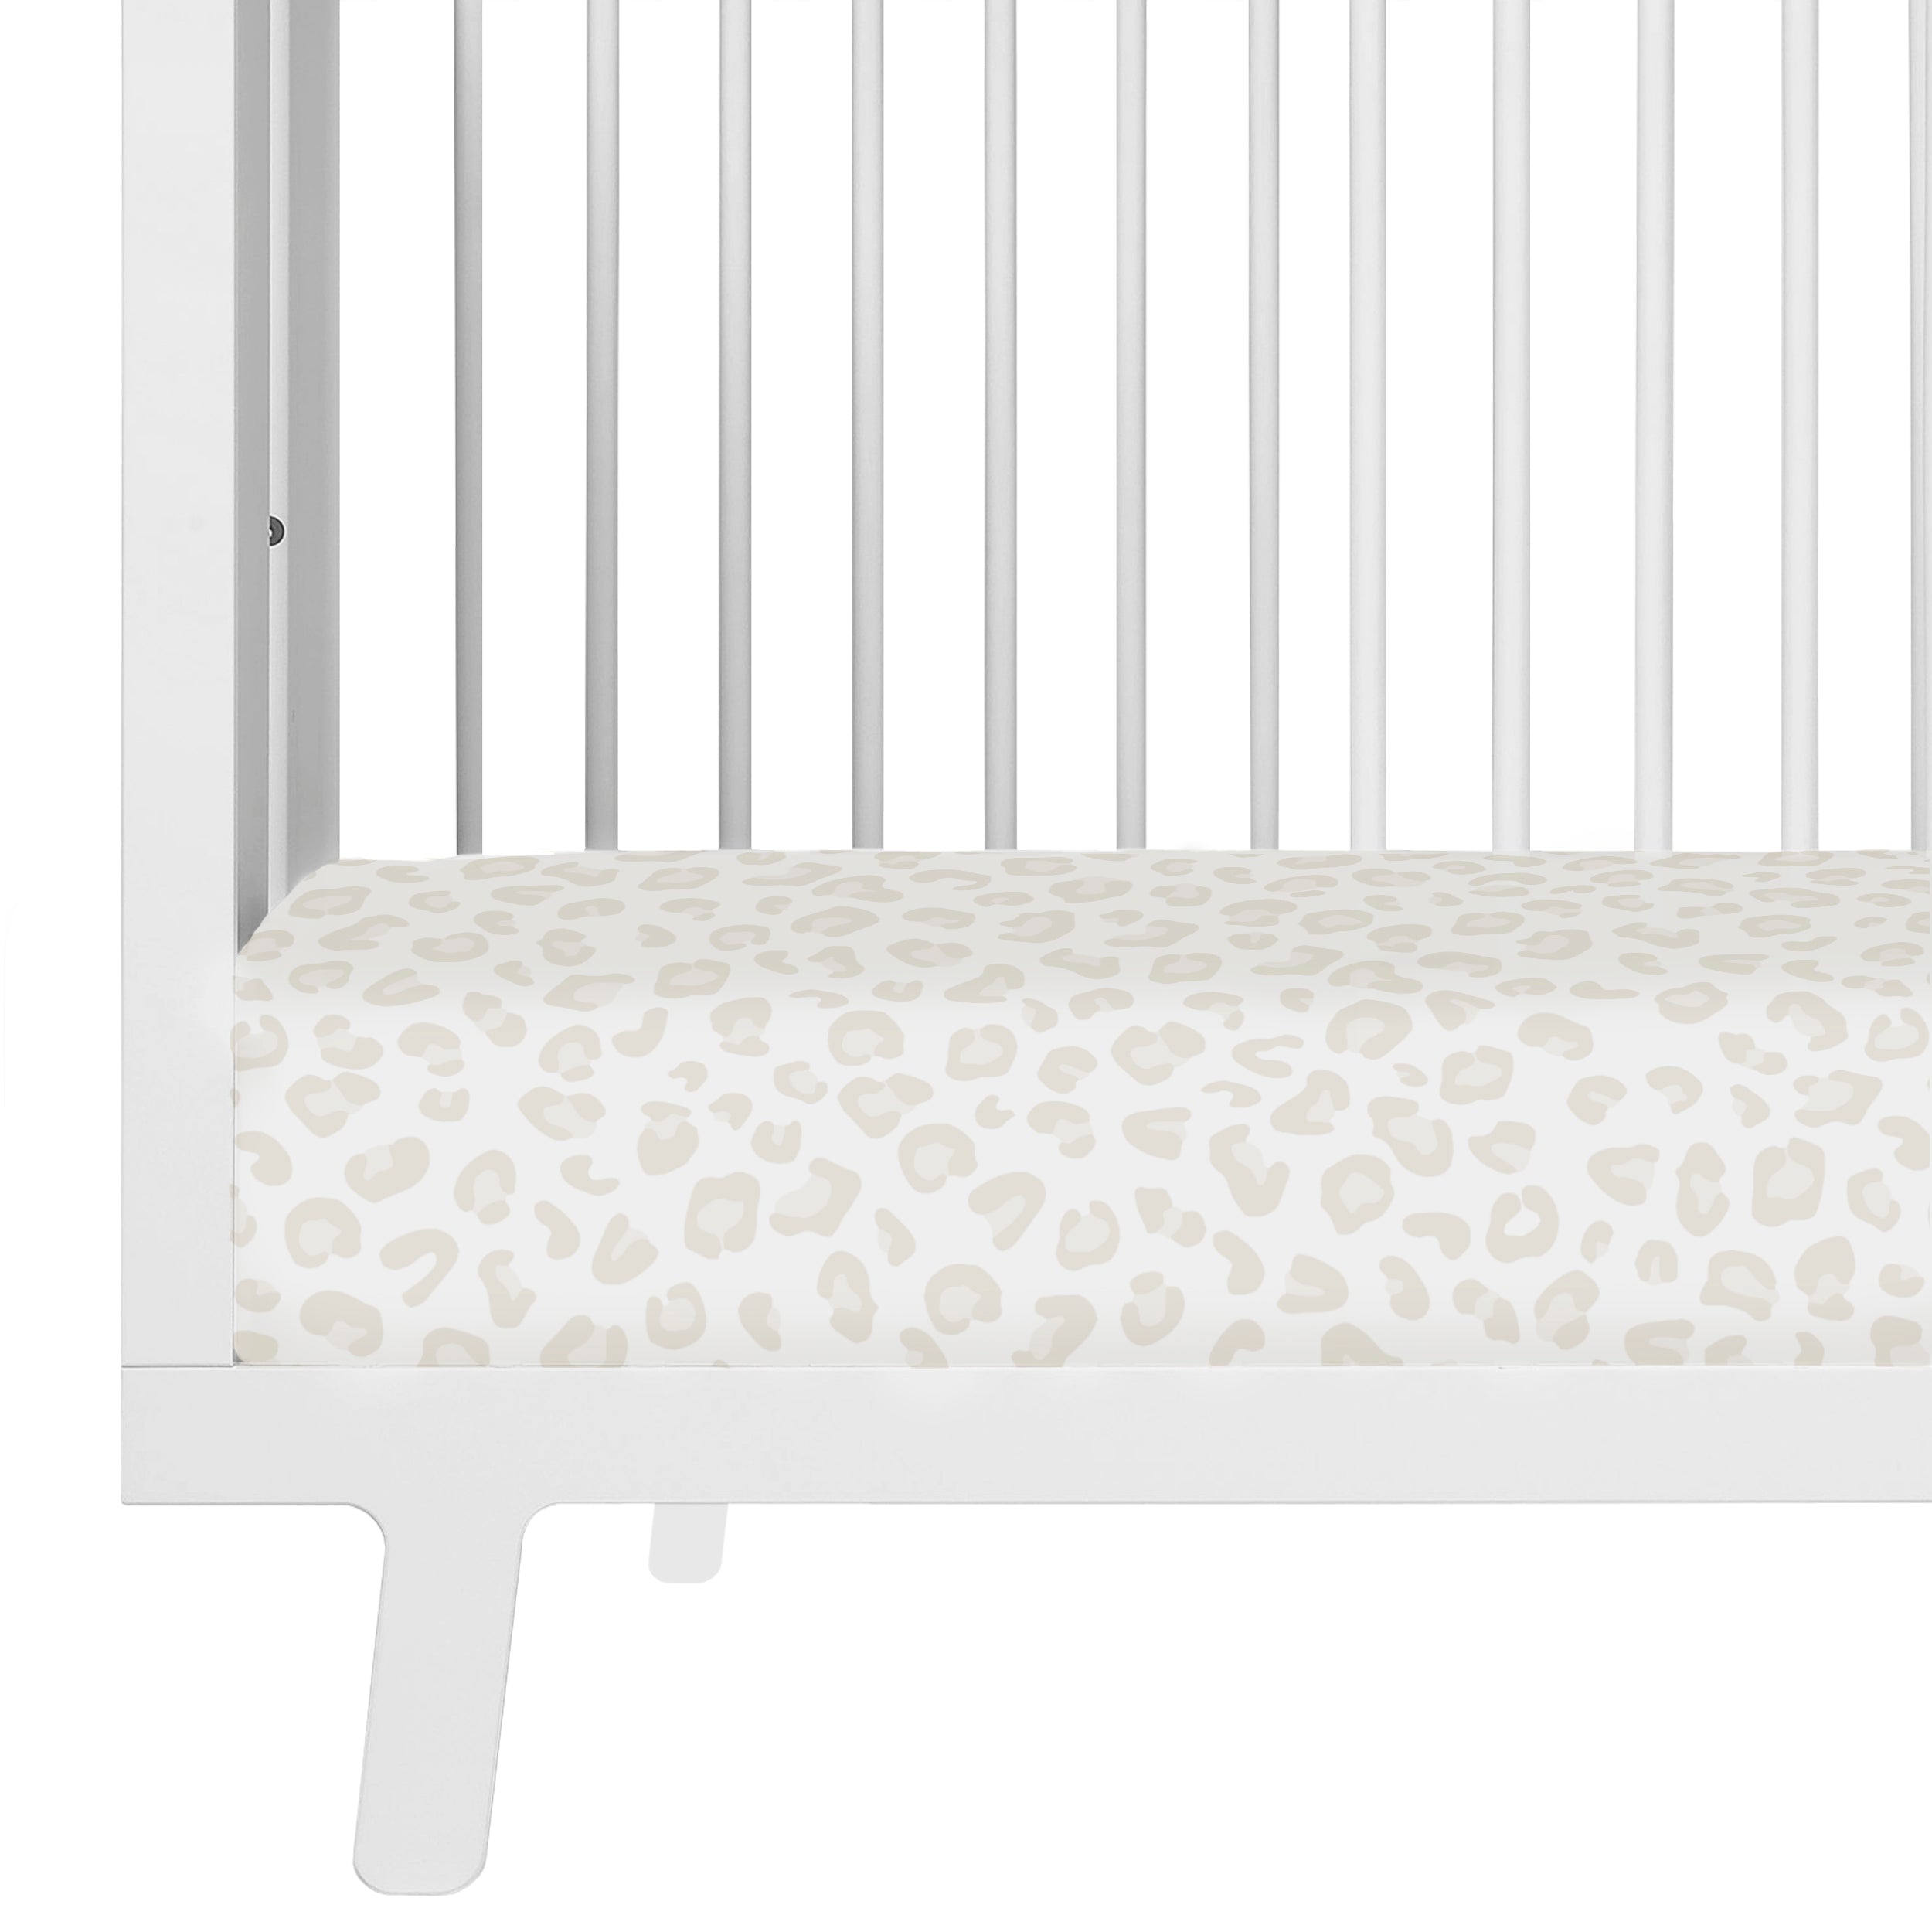 Close-up of a Makemake Organics white crib with a mattress covered in a Wild leopard print design. The crib features vertical bars and a visible side rail.